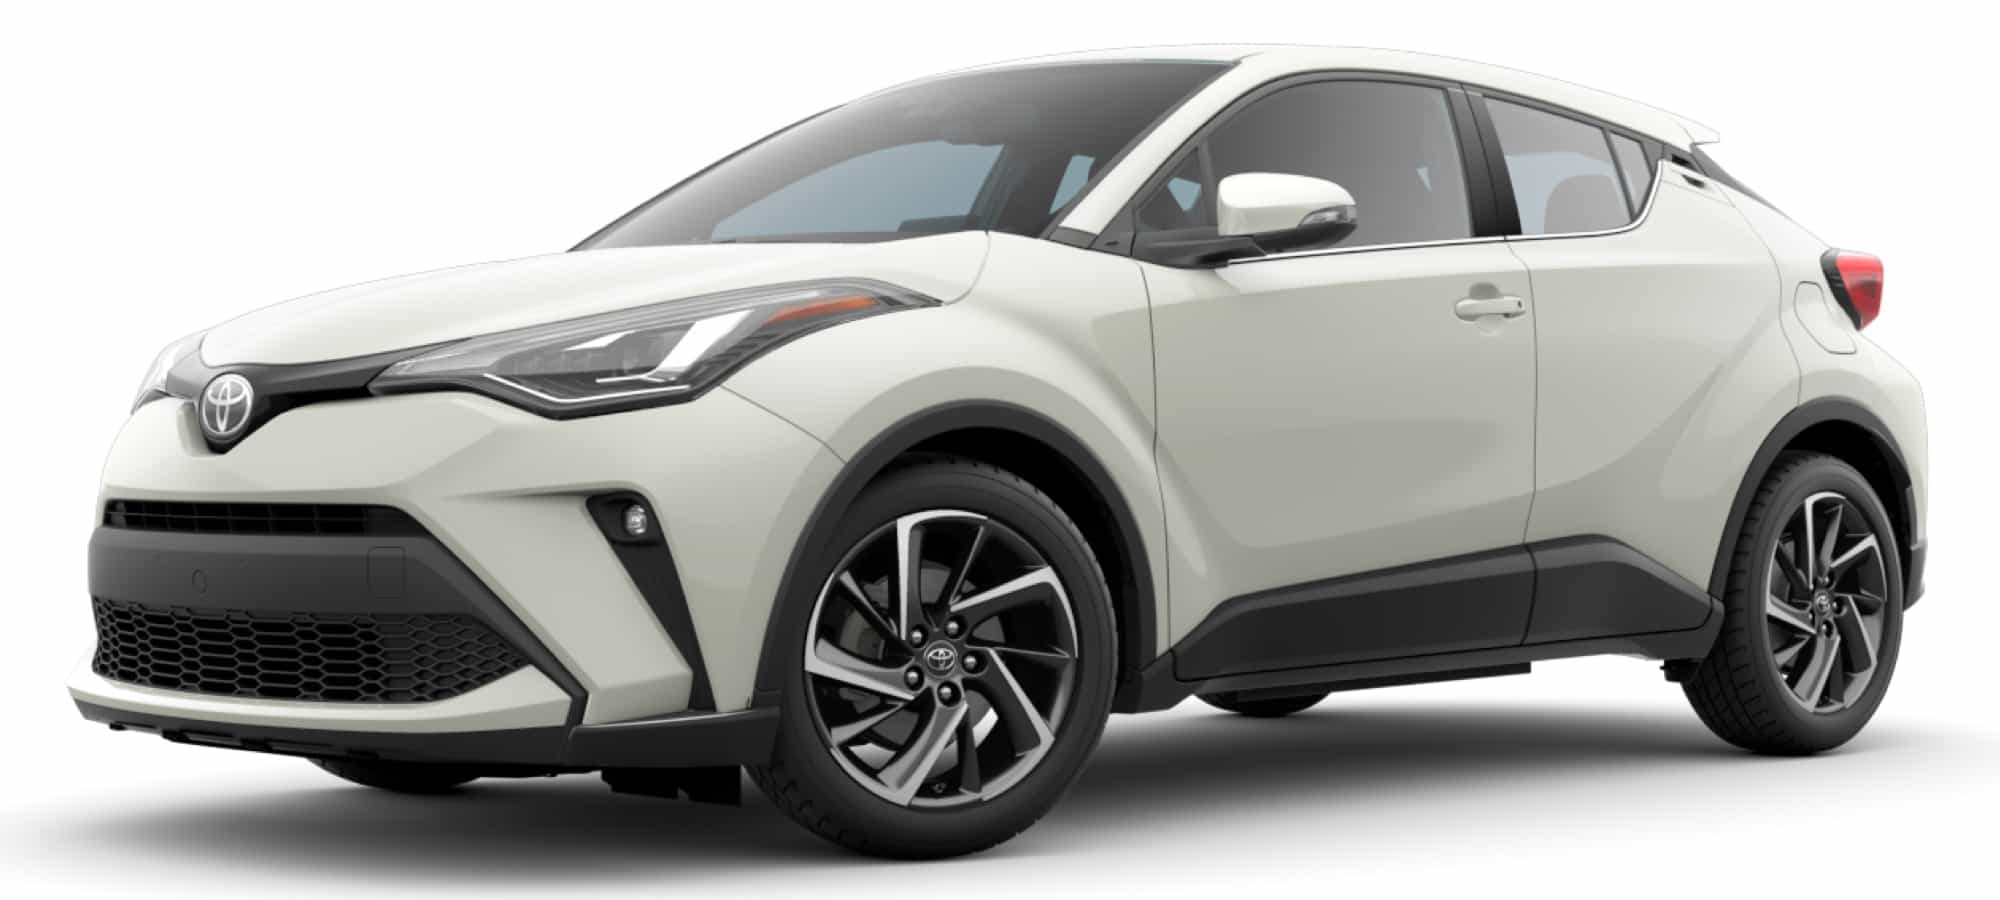 2020 Toyota C-HR Pics, Info, Specs, and Technology | Sterling McCall Toyota